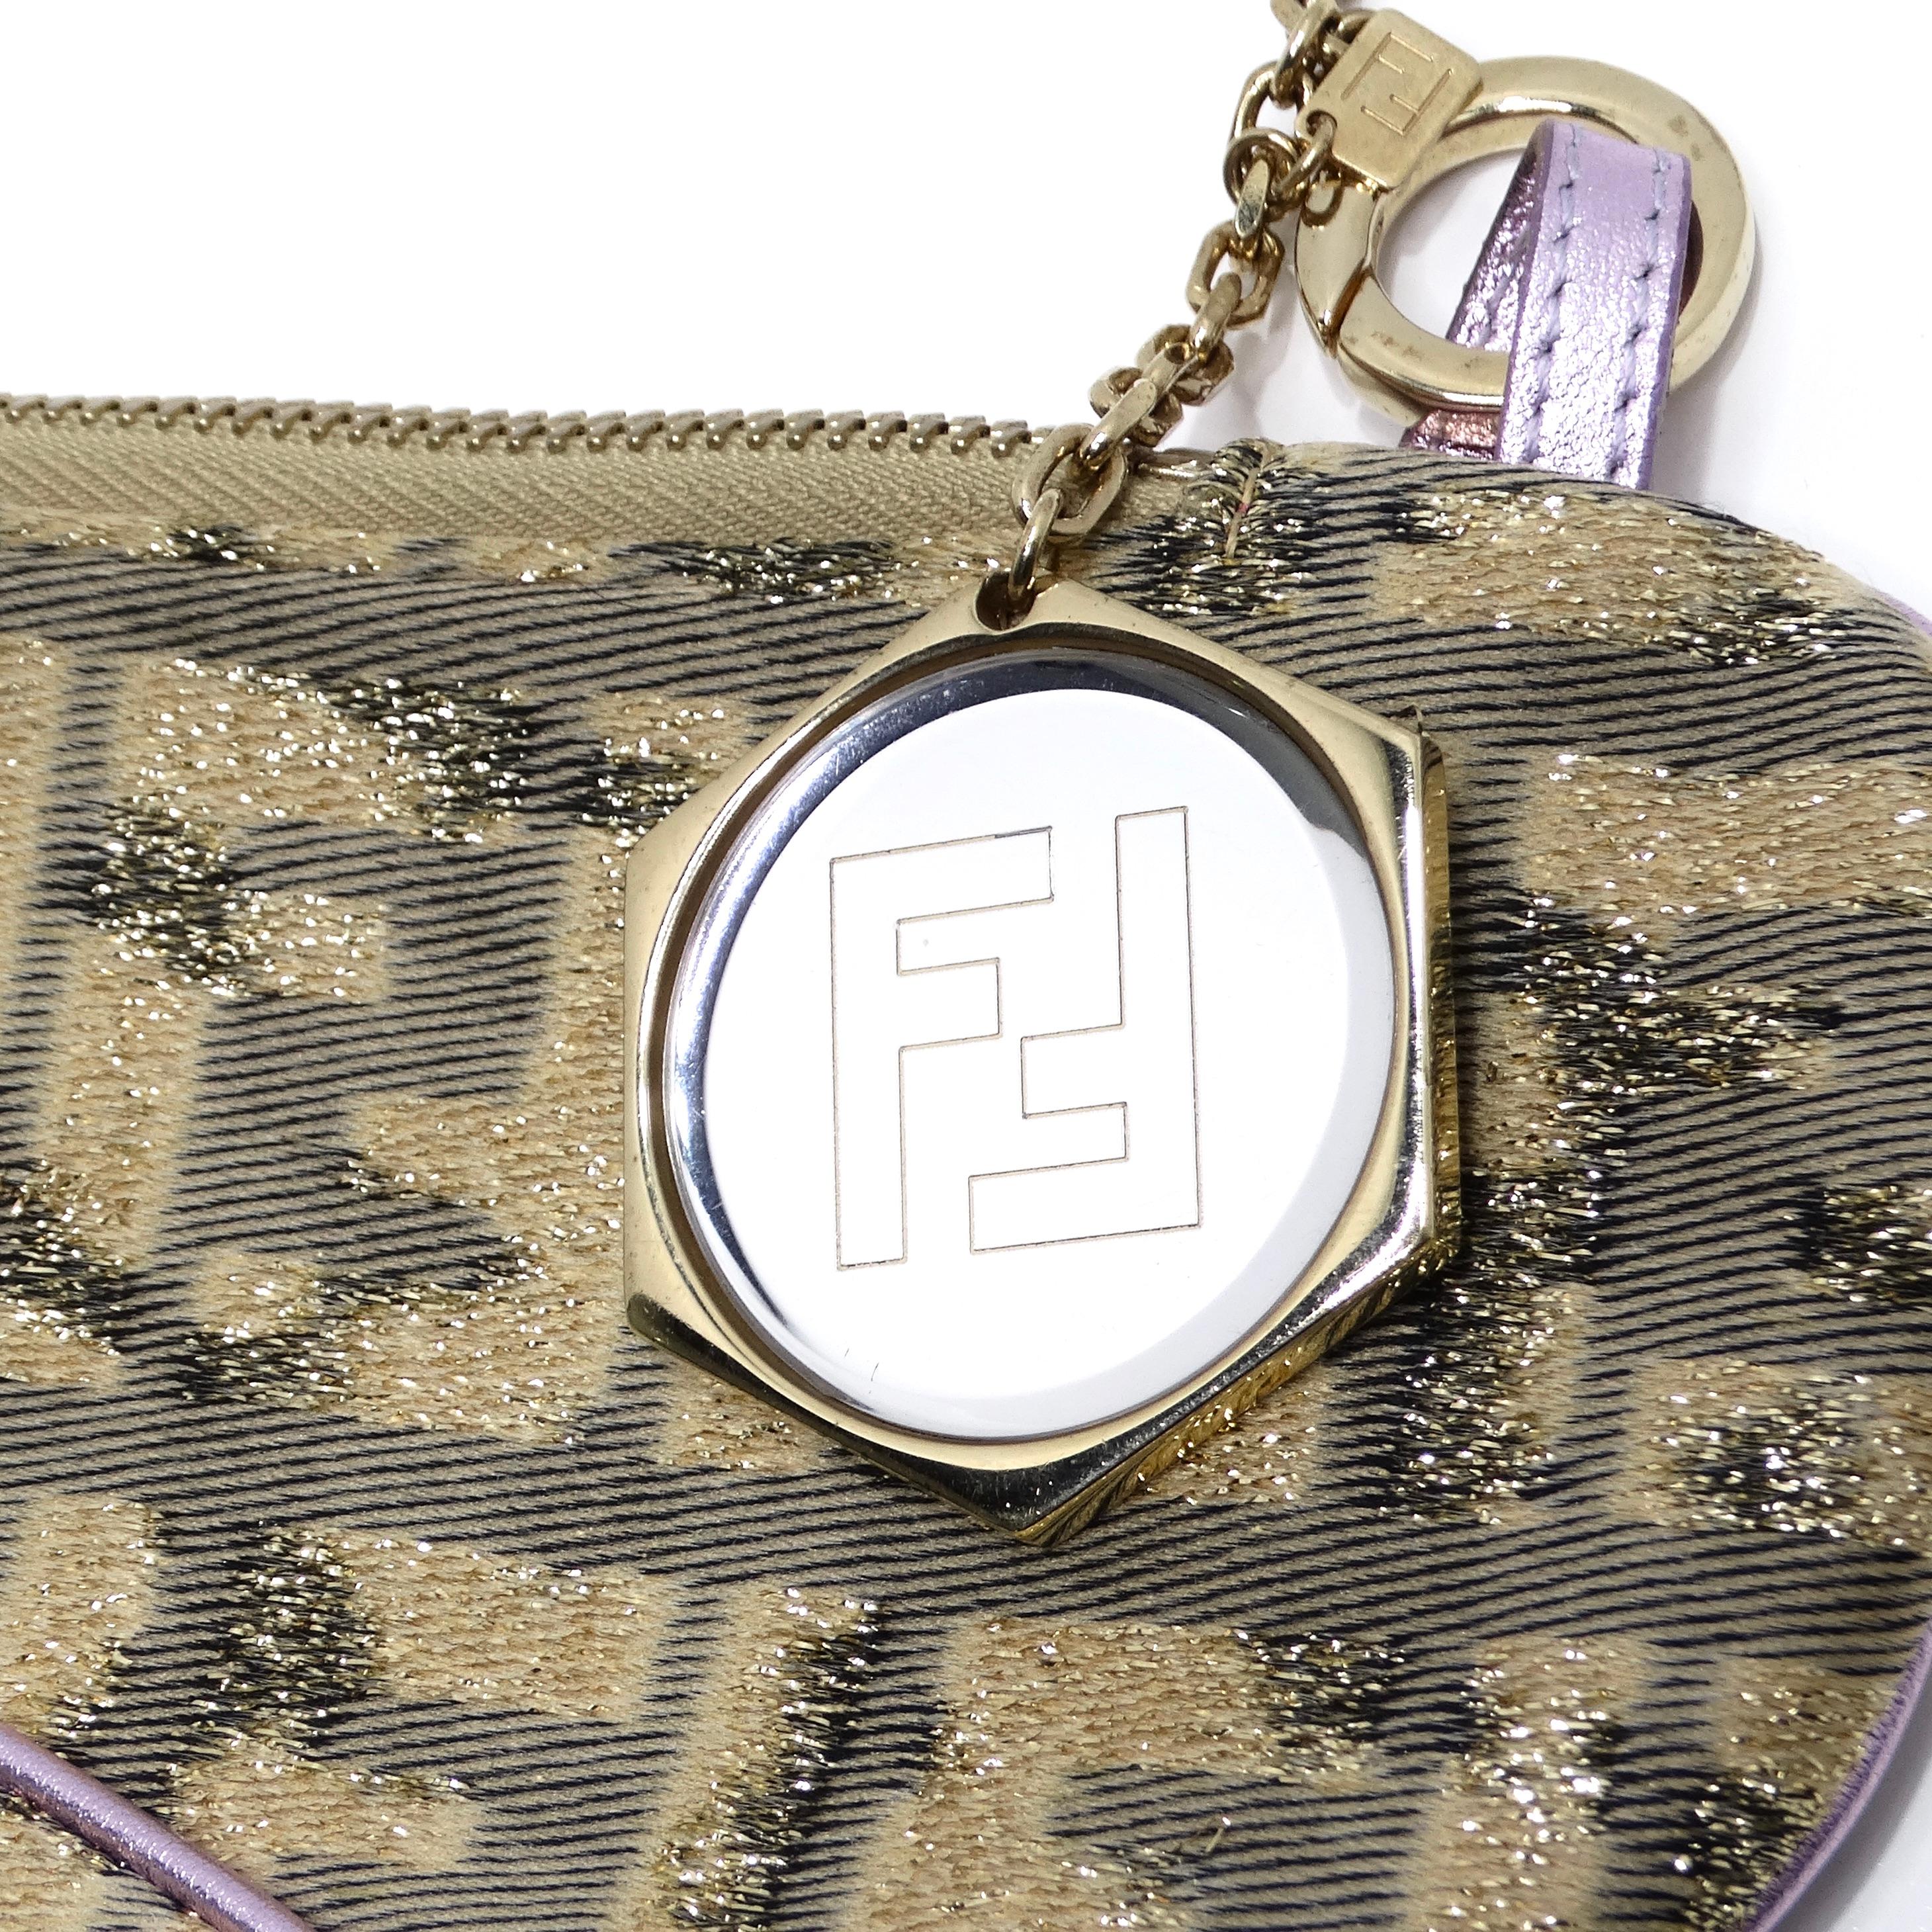 Introducing the Fendi 2002 Gold Lilac Zucca Monogram Micro Handbag, a captivating and playful creation that exudes luxury and sophistication. Crafted with meticulous attention to detail, this limited edition mini shoulder bag is a true statement